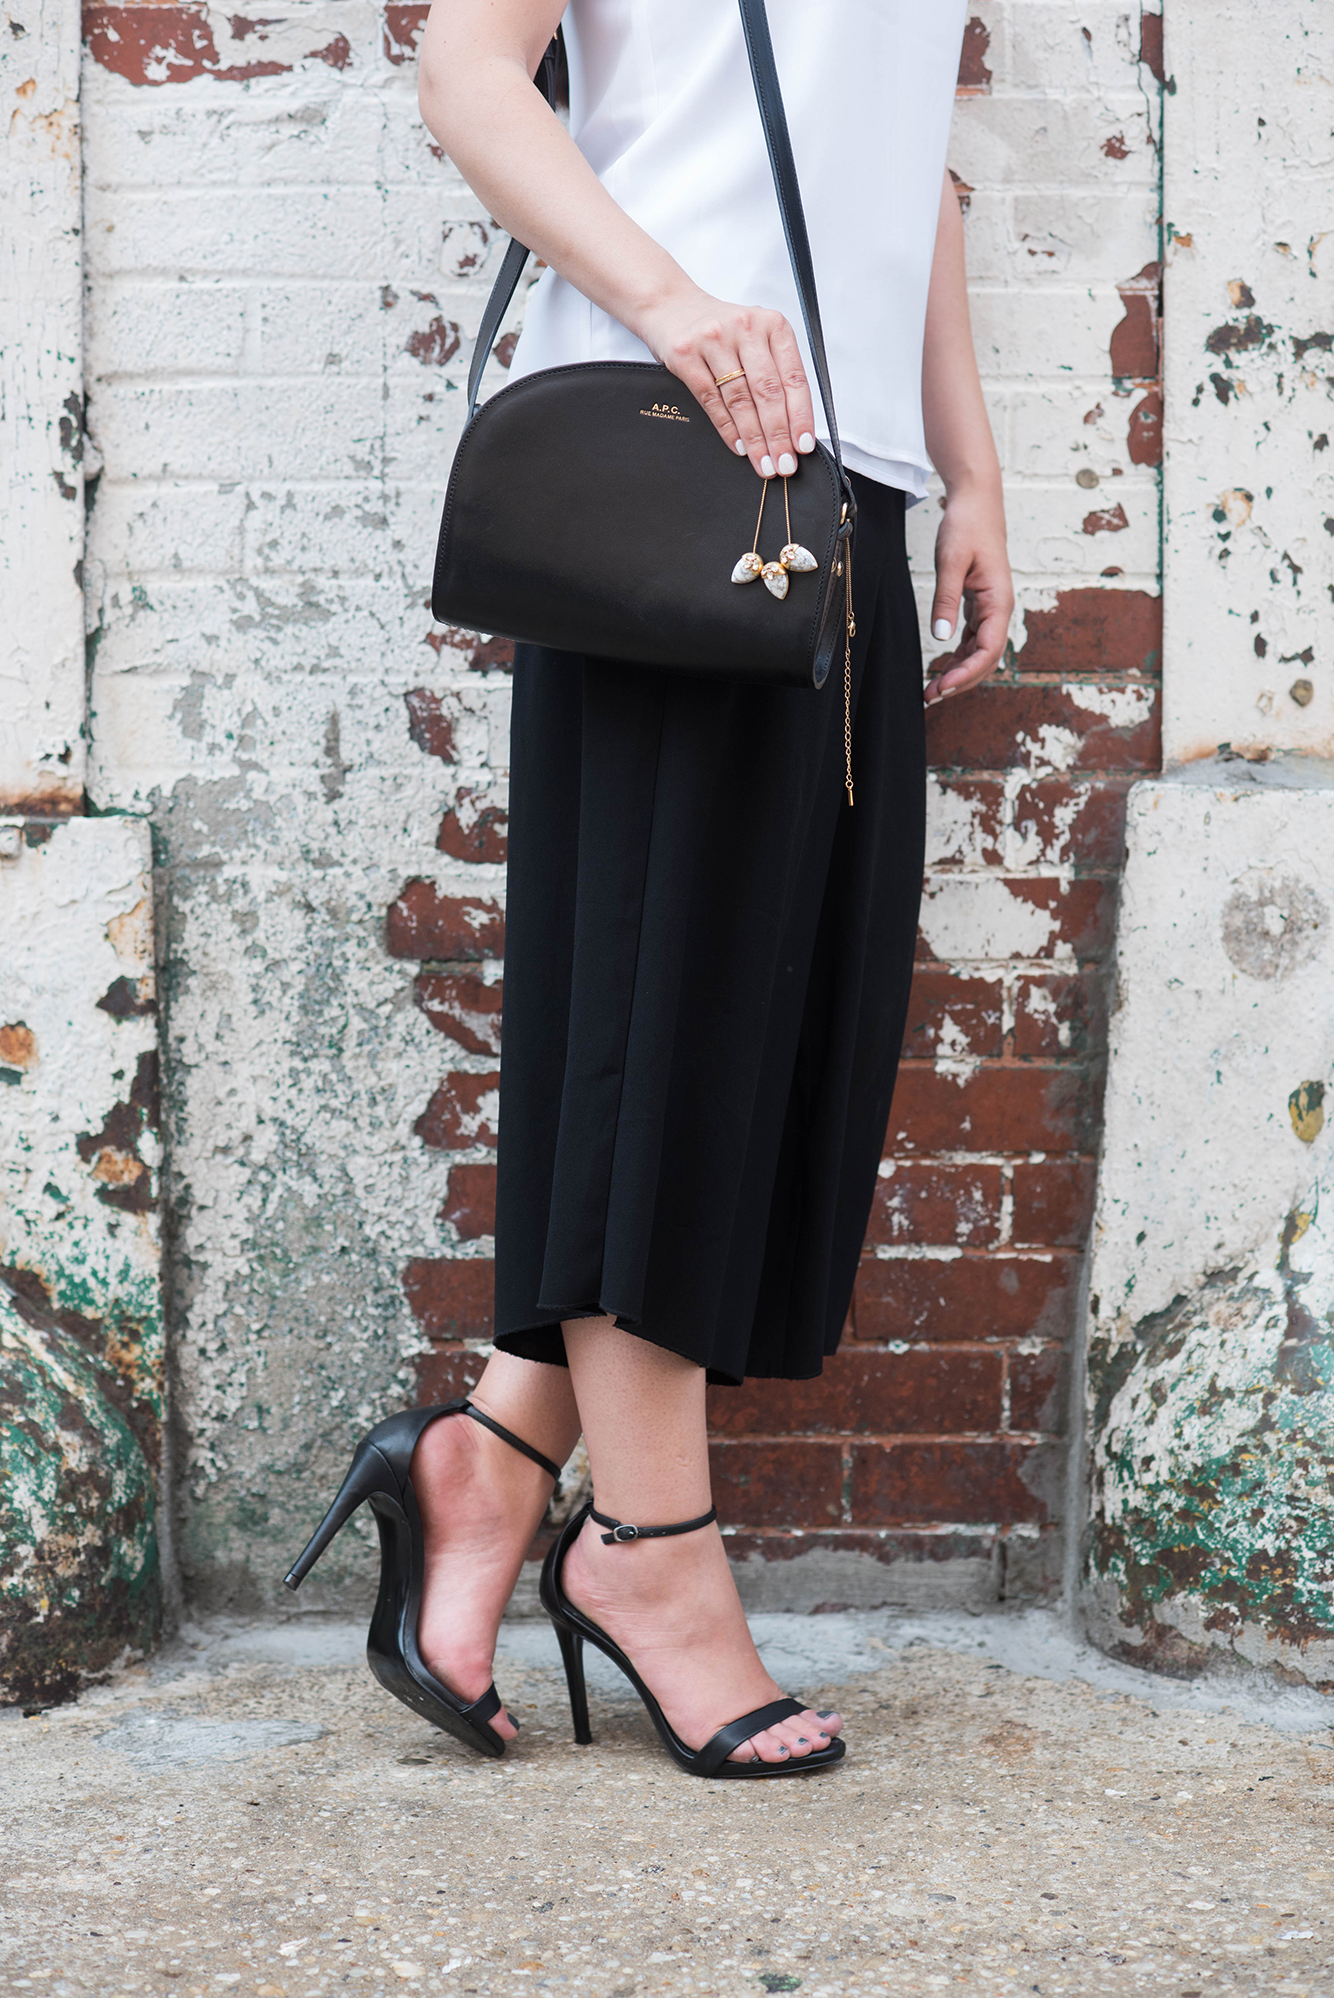 coco-and-vera-top-vancouver-fashion-blog-top-canadian-fashion-blog-top-blogger-aritzia-culottes-olive-and-piper-marble-necklace-apc-half-moon-bag-steve-madden-stecy-sandals